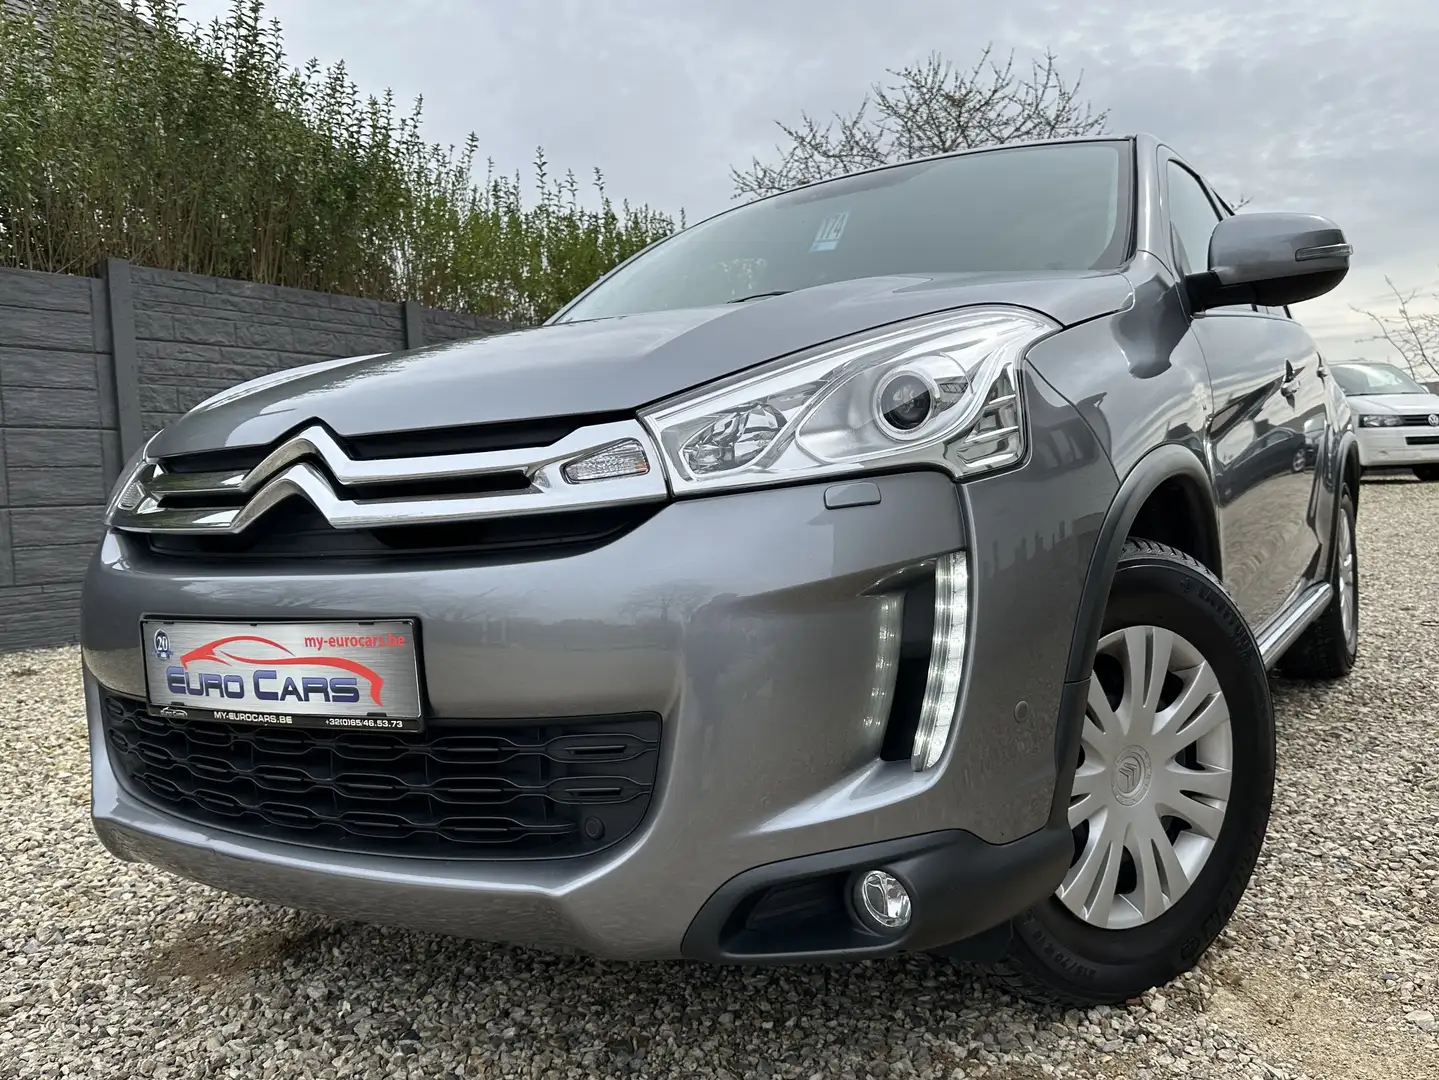 Citroen C4 Aircross 1.6i 2WD Exclusive CUIR/XENON/LED/CRUISE/PDC/ Grey - 1